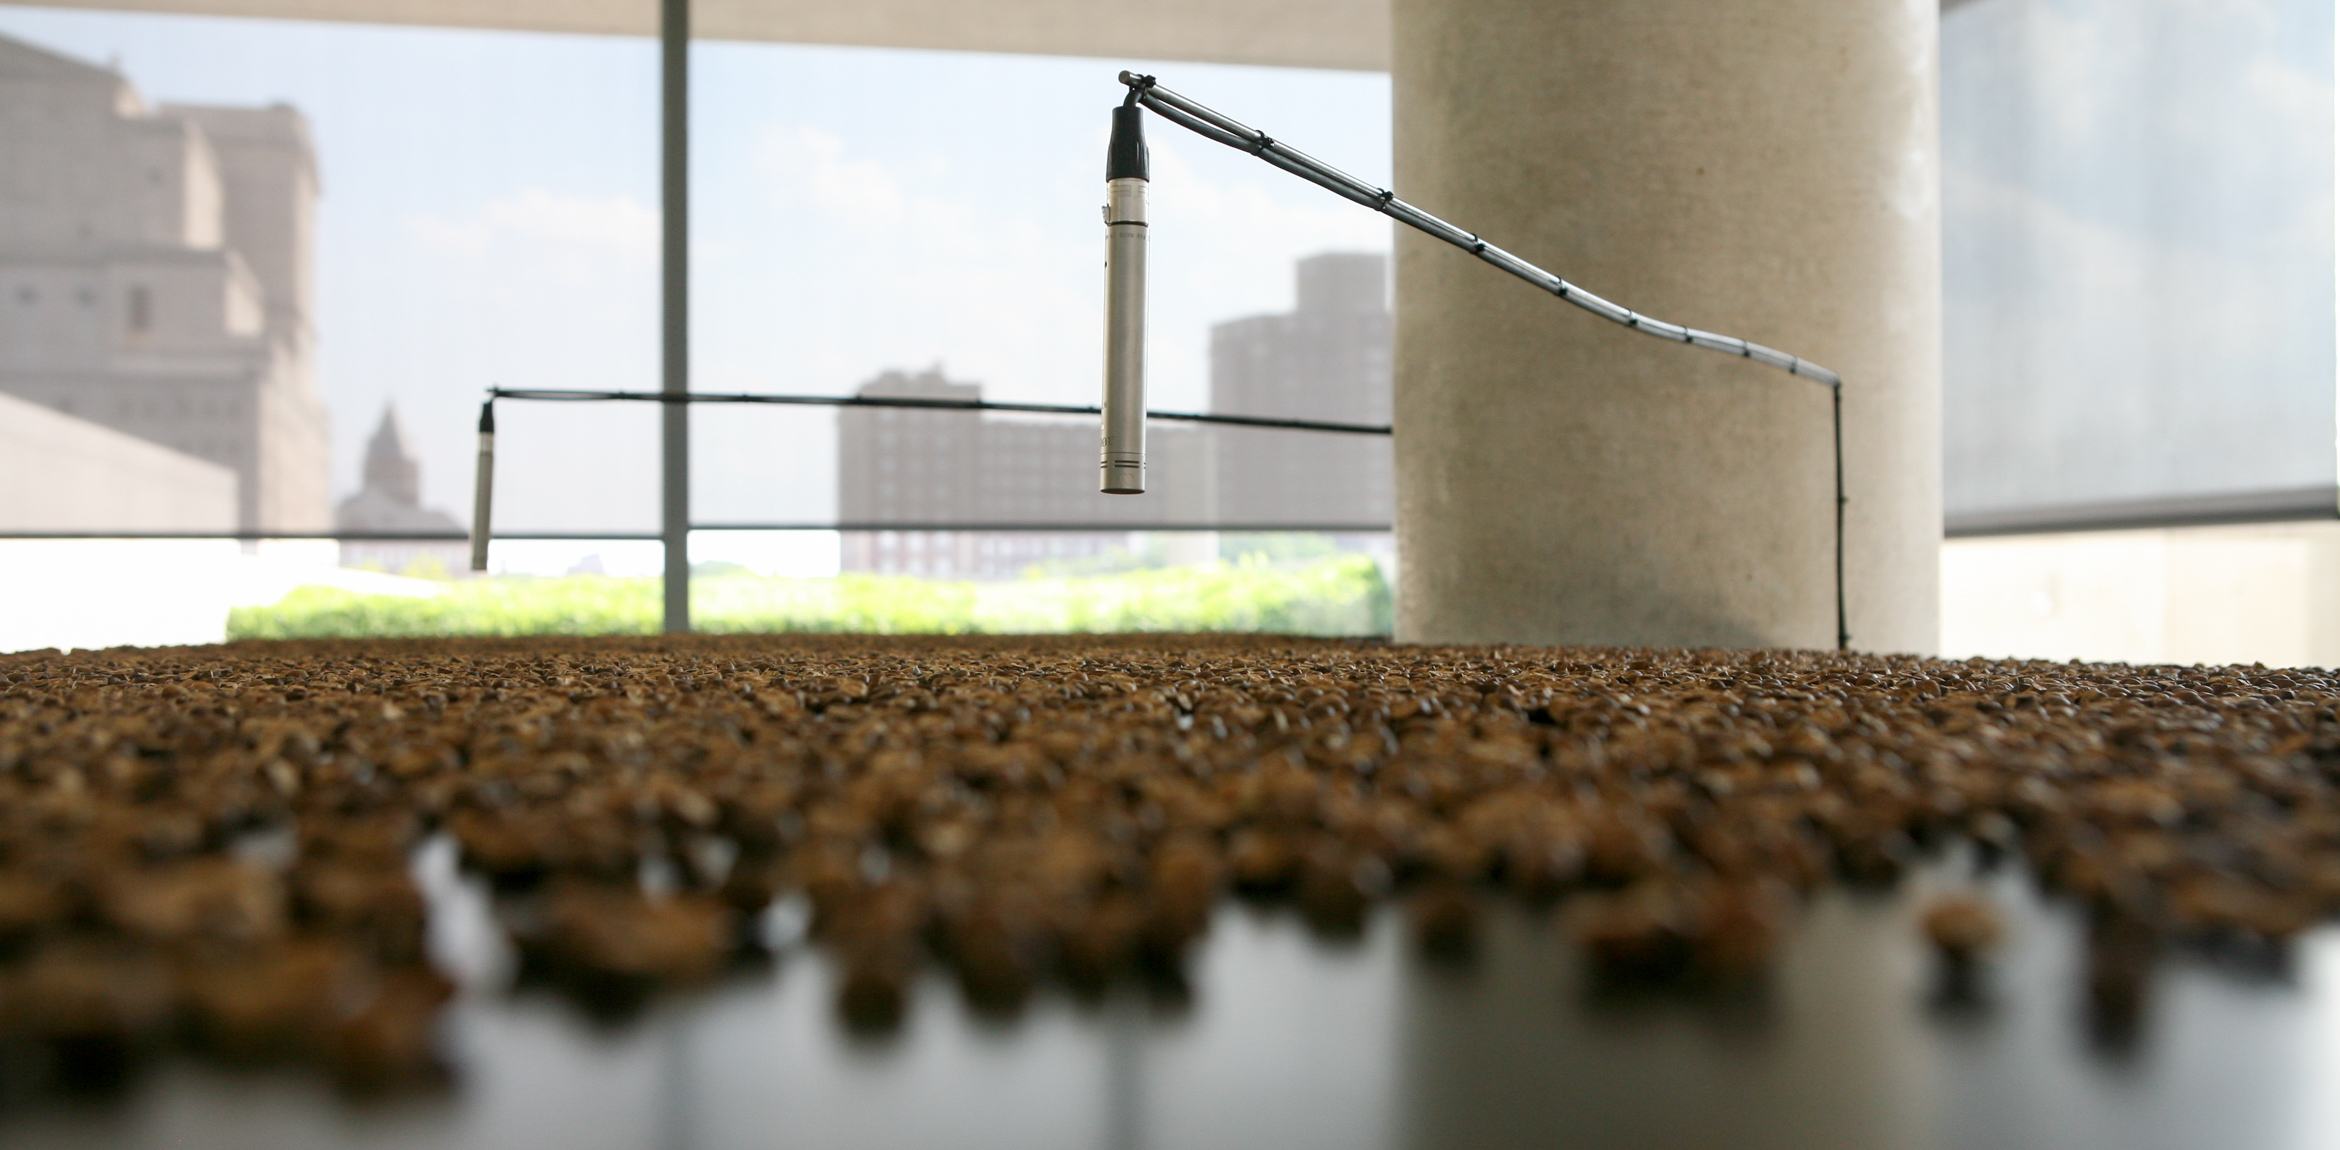 Closeup of a table covered in Mexican jumping beans, shells inhabited by larval moths, with two microphones positioned above it.